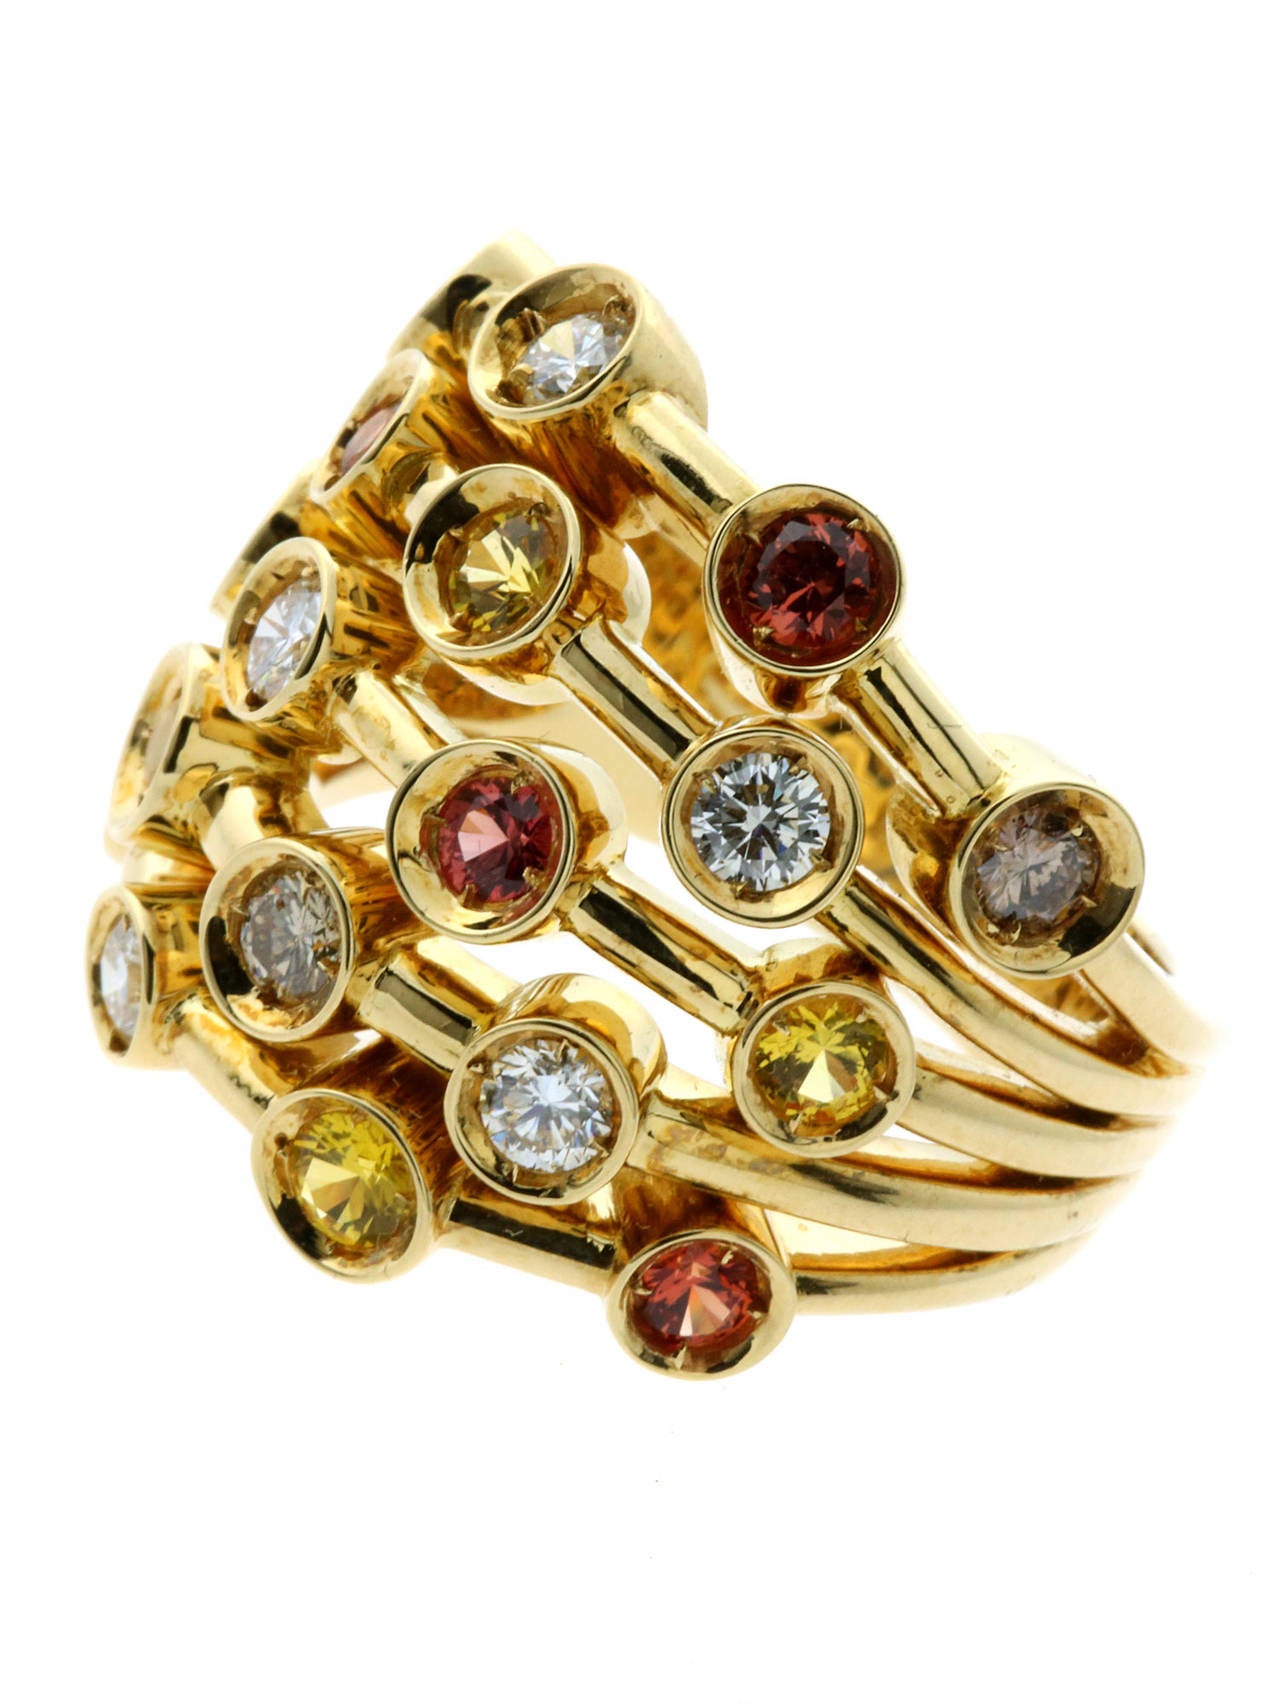 A magnificent authentic Chanel cocktail ring featuring  a brilliant assortment of multicolored fancy sapphires and both white & fancy brown diamonds set in 18k yellow gold.

Size:  53 / US 6 1/4
Dimensions: 20mm wide (.78″ Inches)

Inventory ID: